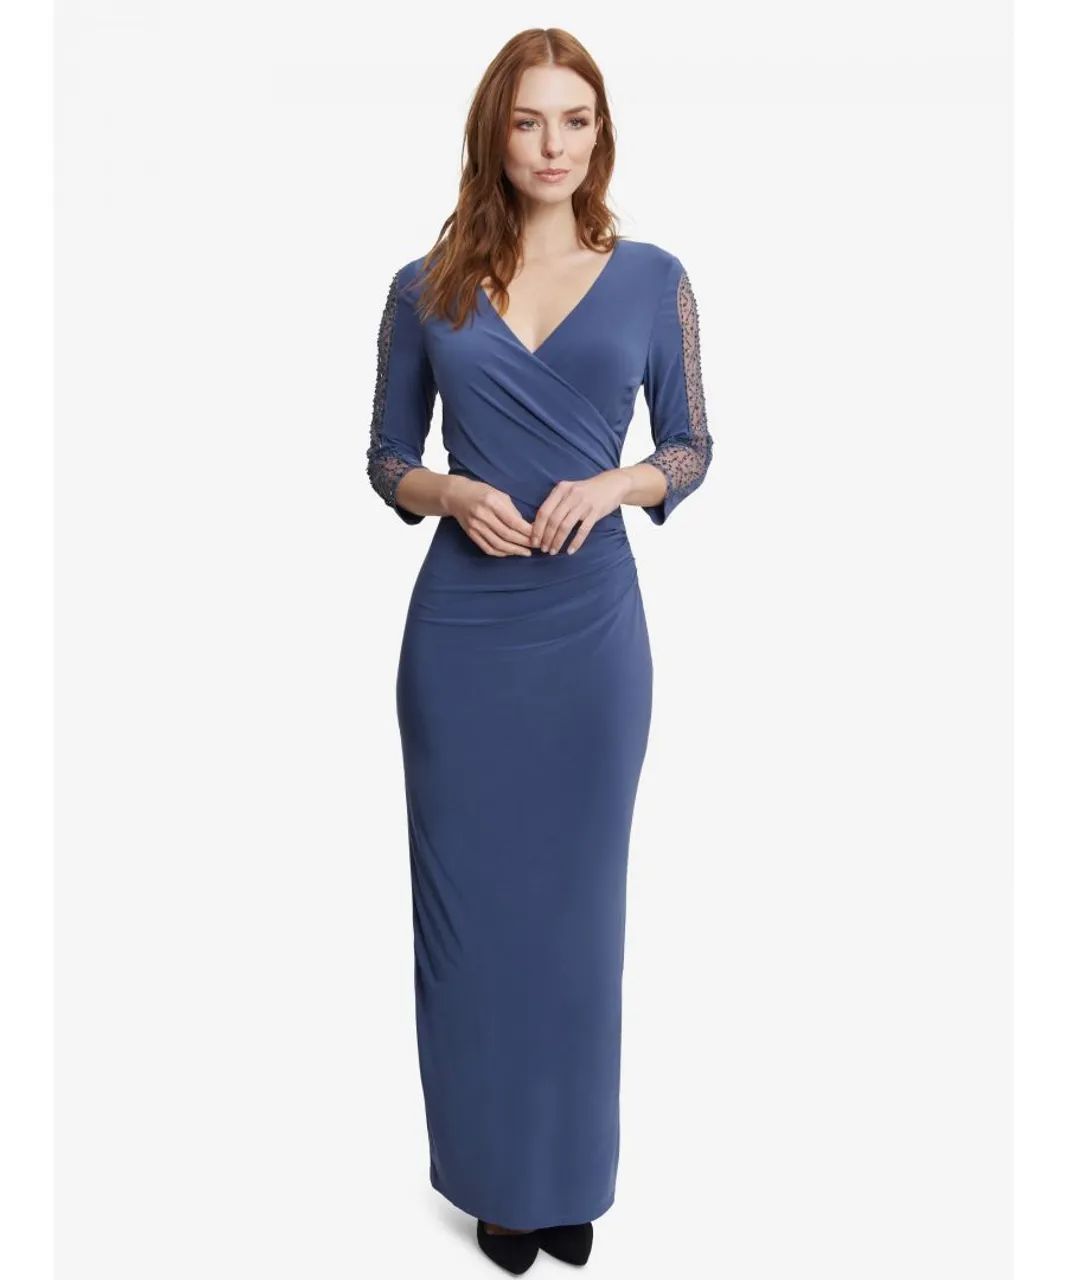 Gina Bacconi Womens Gretchen Long Surplice Neckline Dress With Rusched Waist And Beaded Sleeves. - Blue